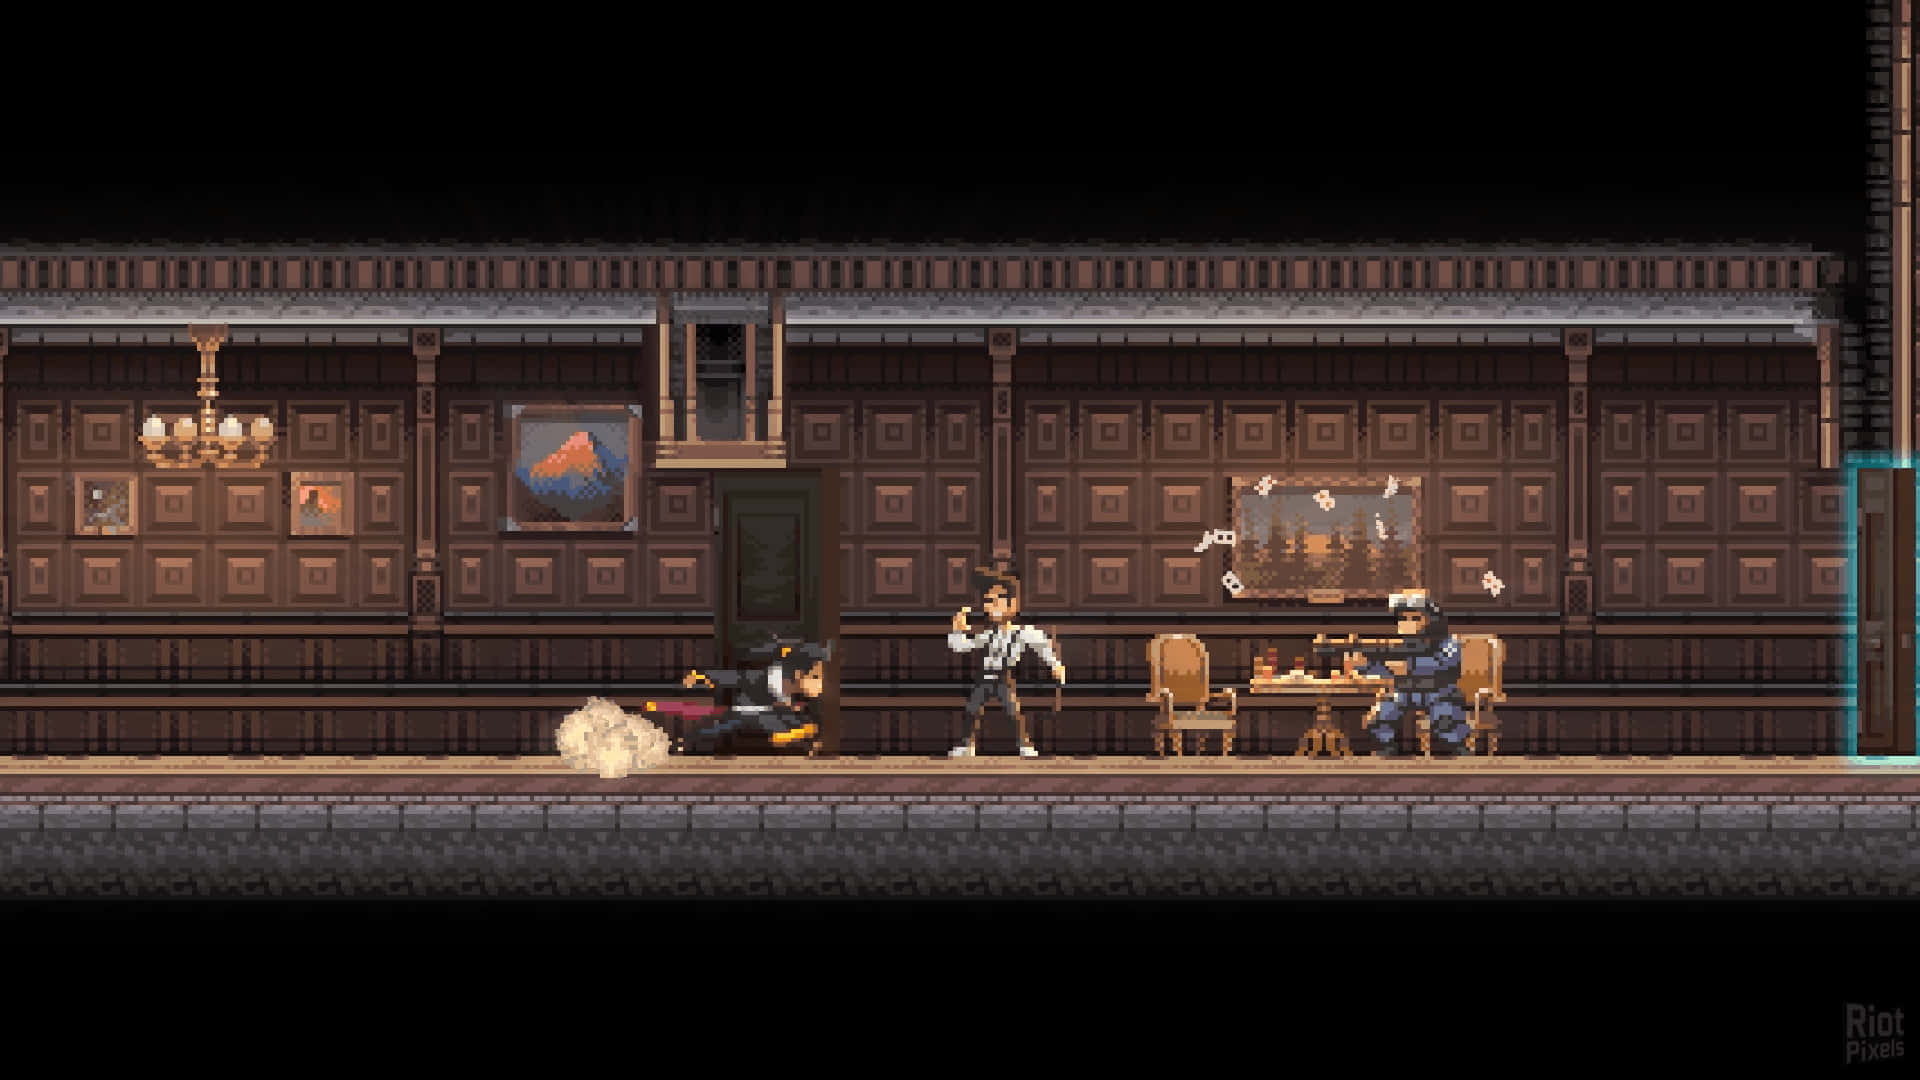 A Screenshot Of A Game With Two People In A Room Wallpaper